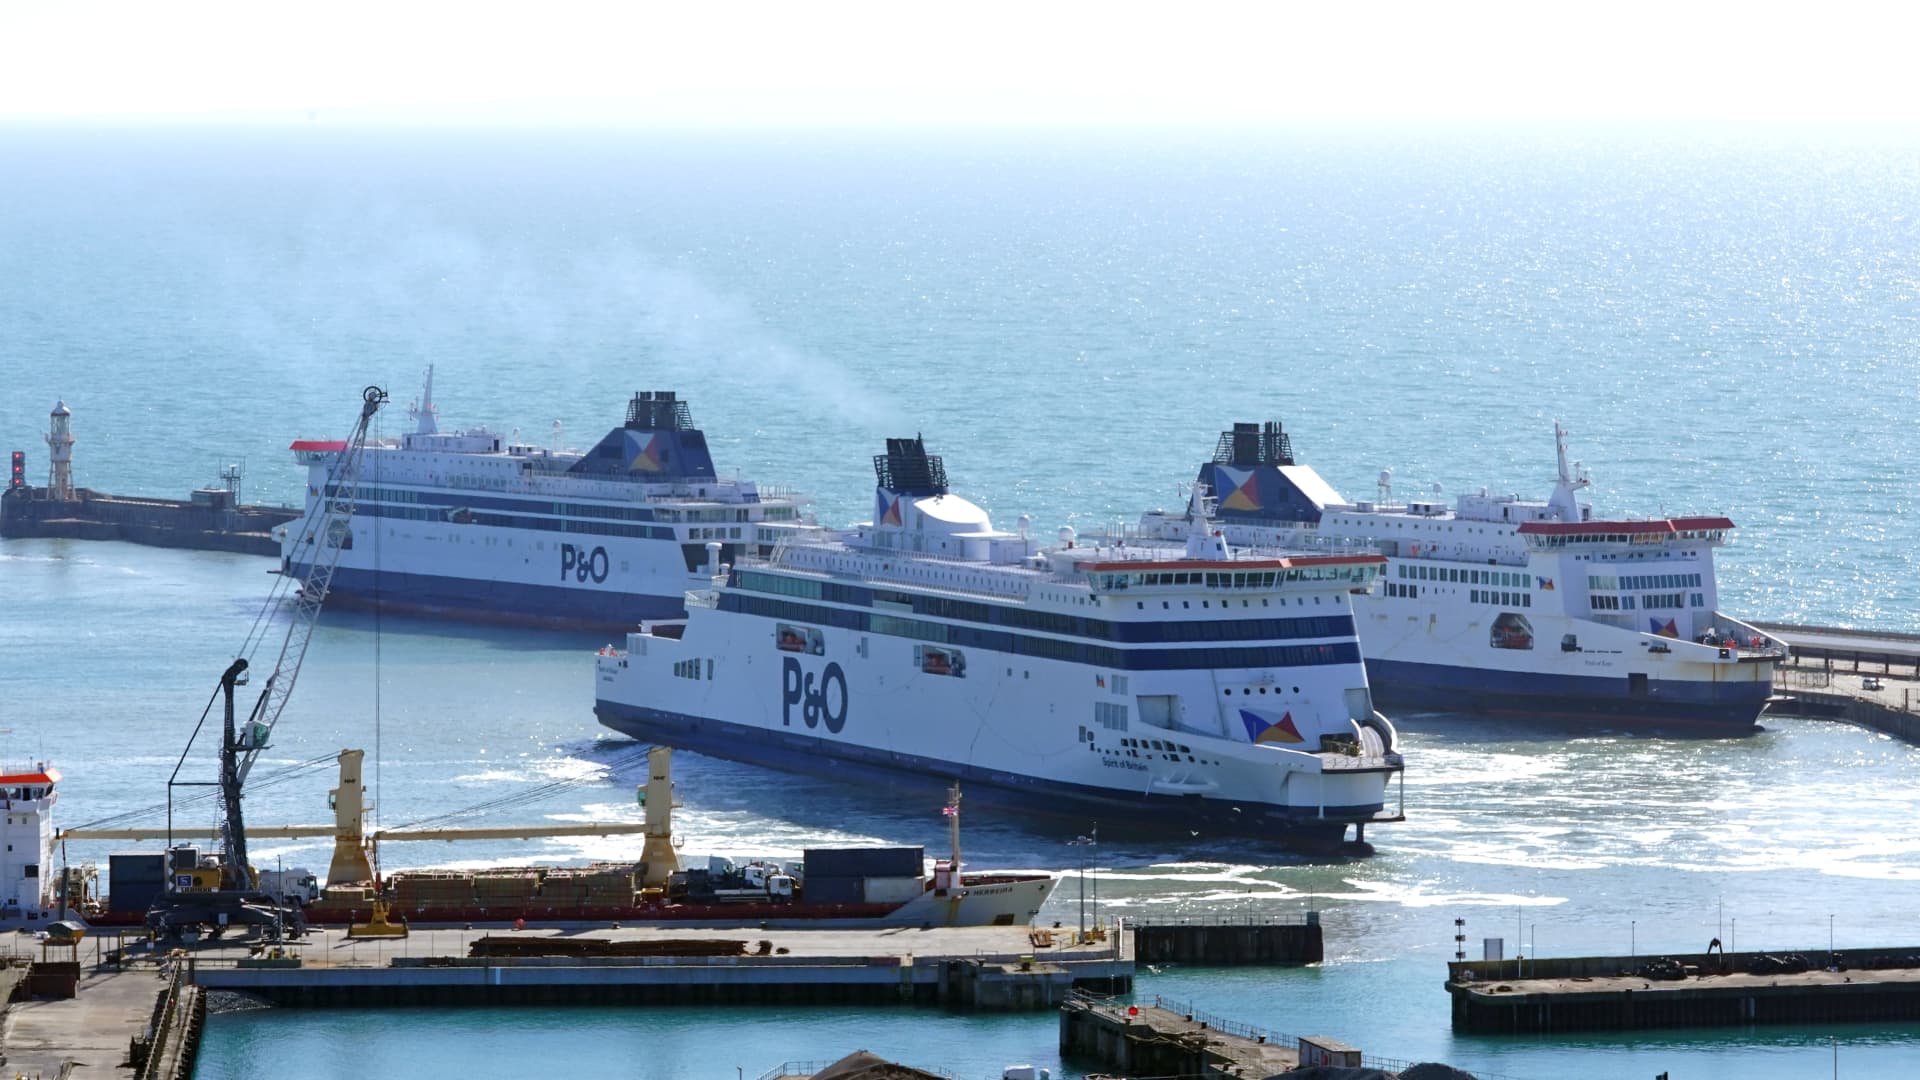 P&O Ferries sacks 800 staff and suspends sailing, says not sustainable